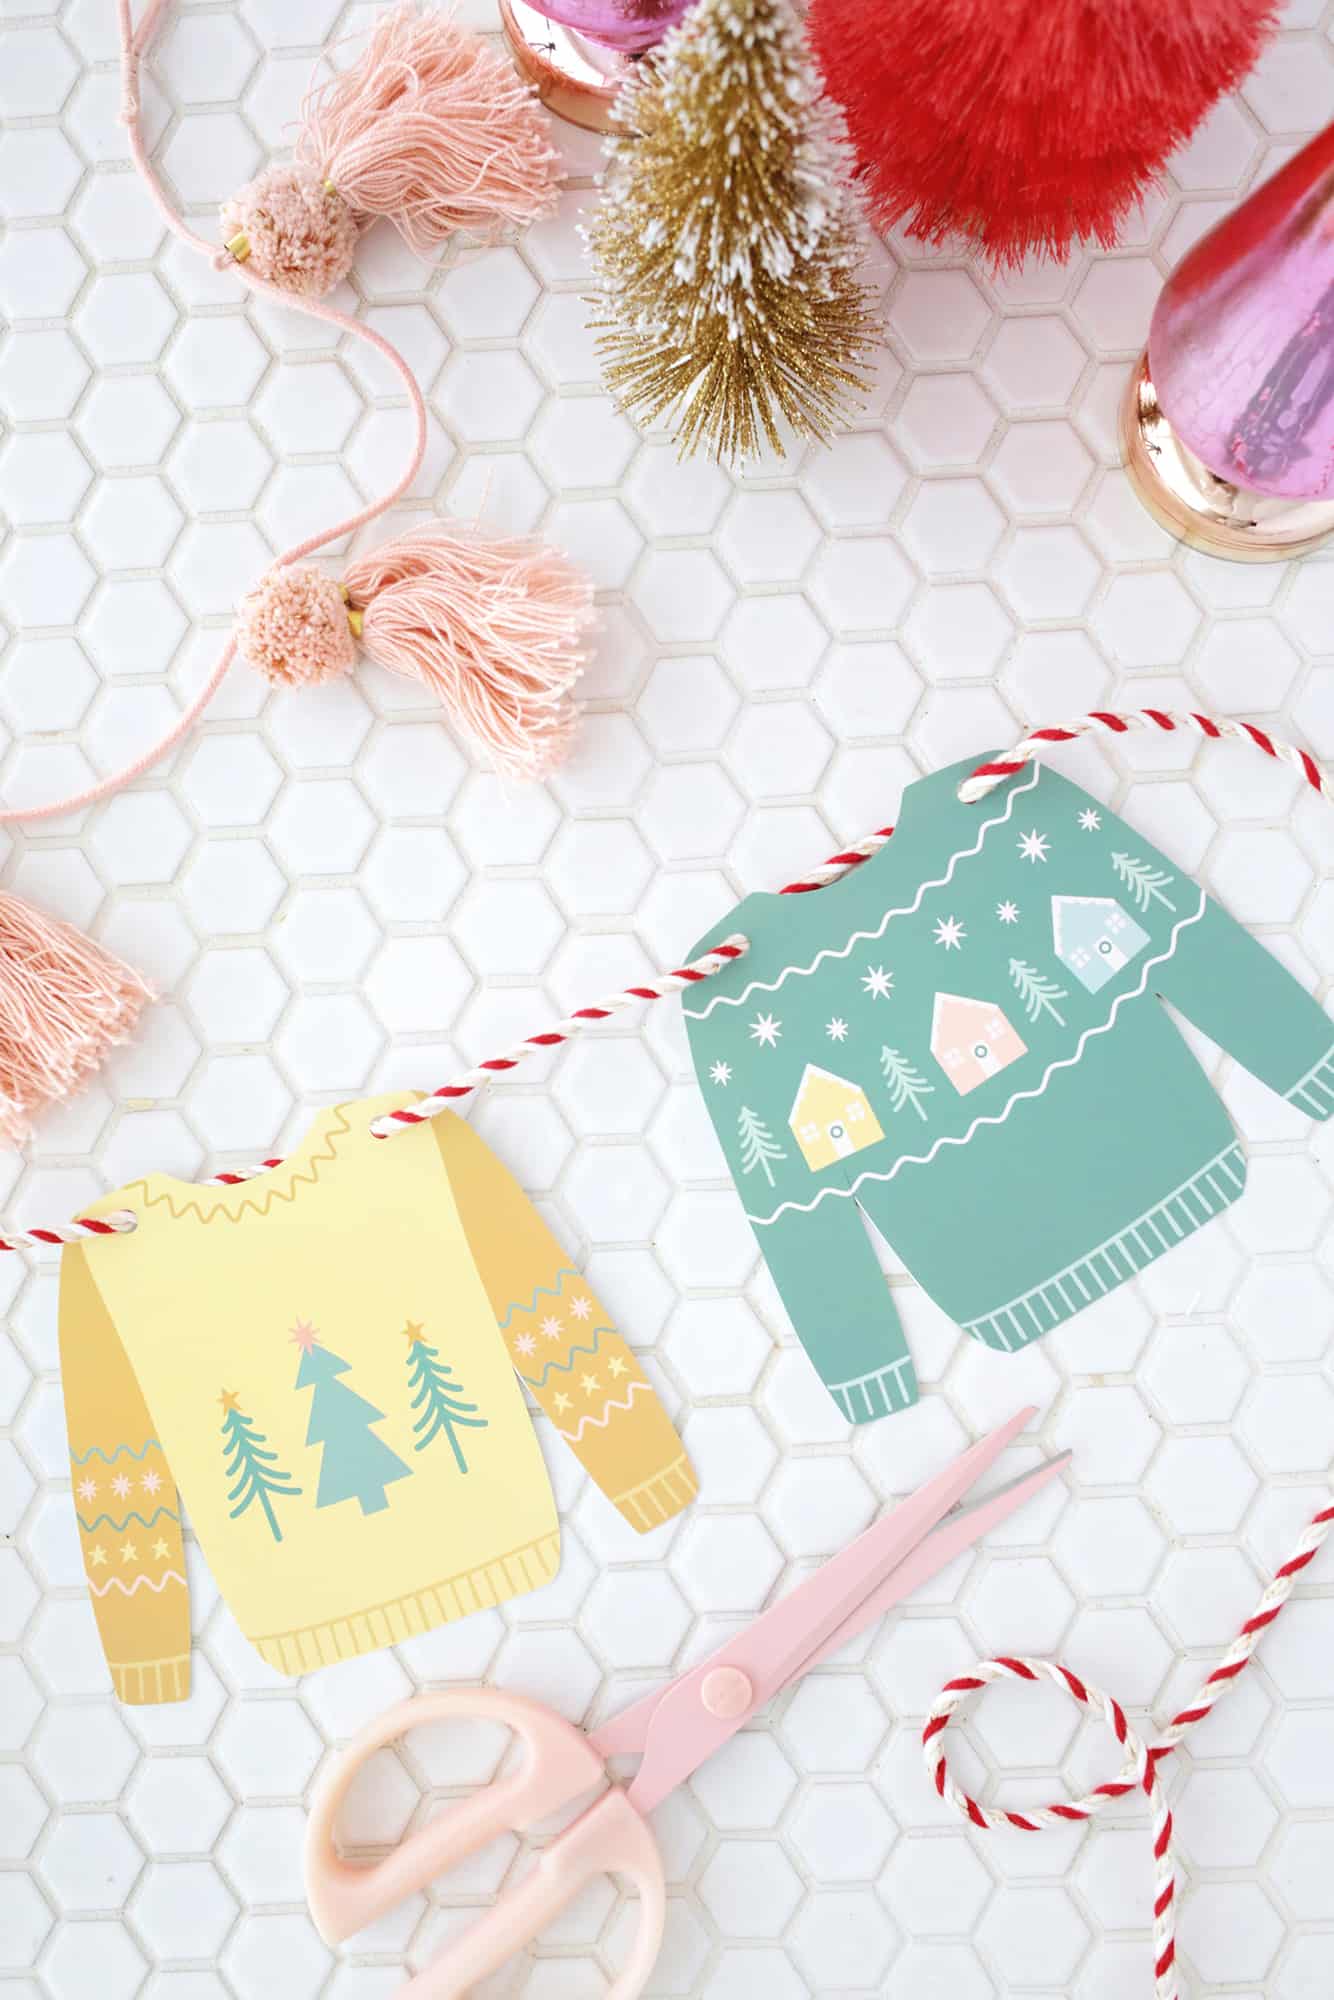 paper Christmas sweaters with a red and white yarn through punched holes